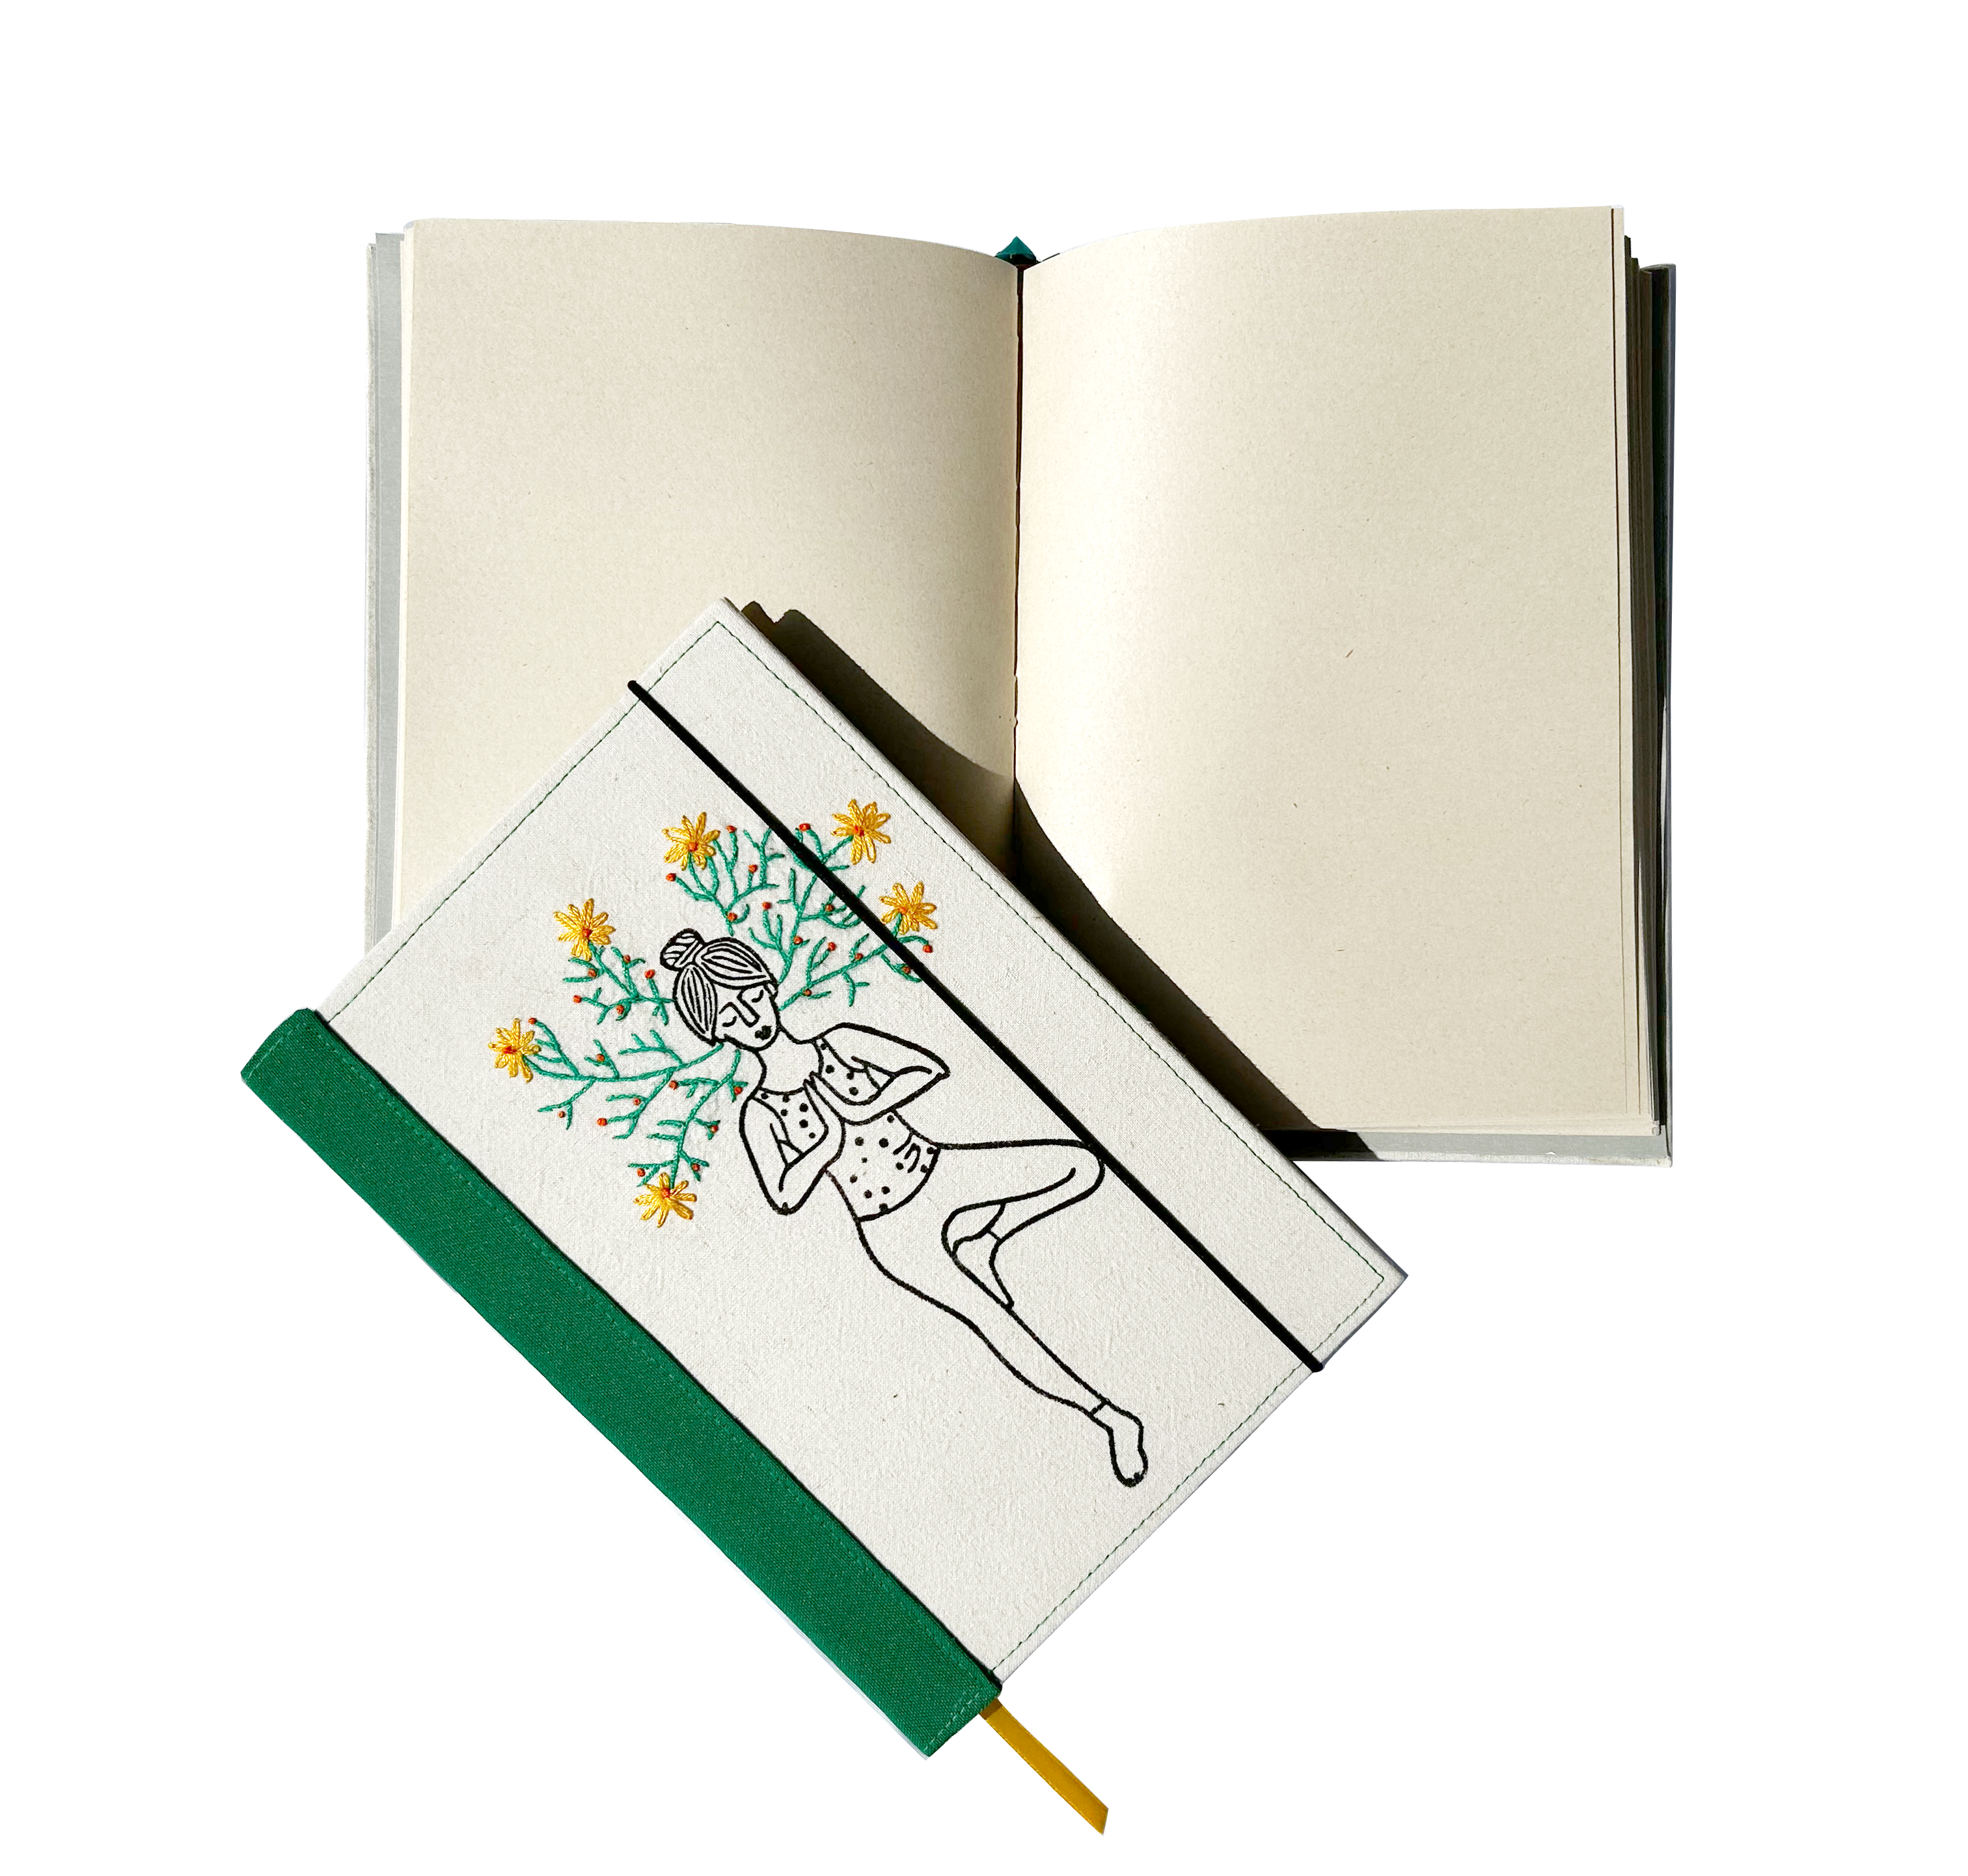 Giftana 3 in 1 Pen with Tumbler and Leather Diary Gift Set